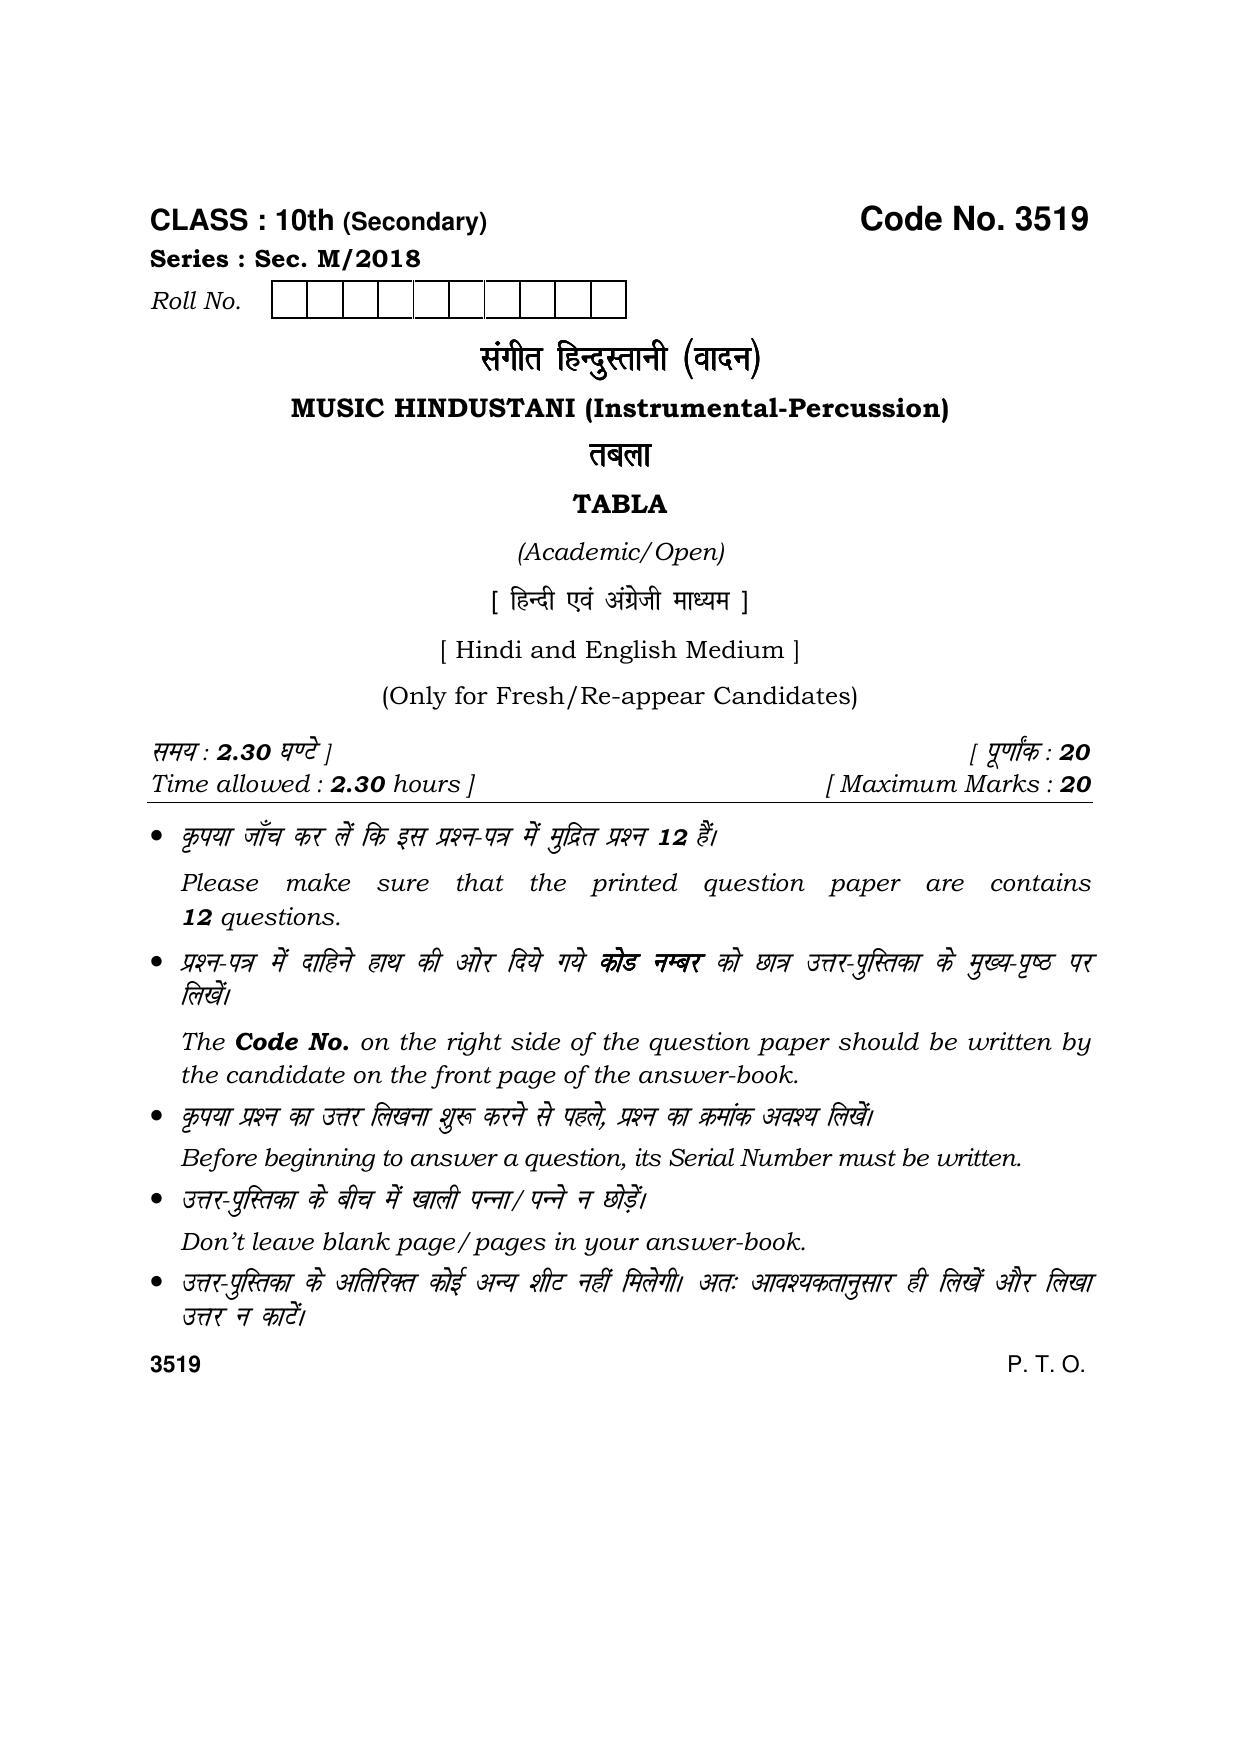 Haryana Board HBSE Class 10 Music Hindustani (Percussion) 2018 Question Paper - Page 1